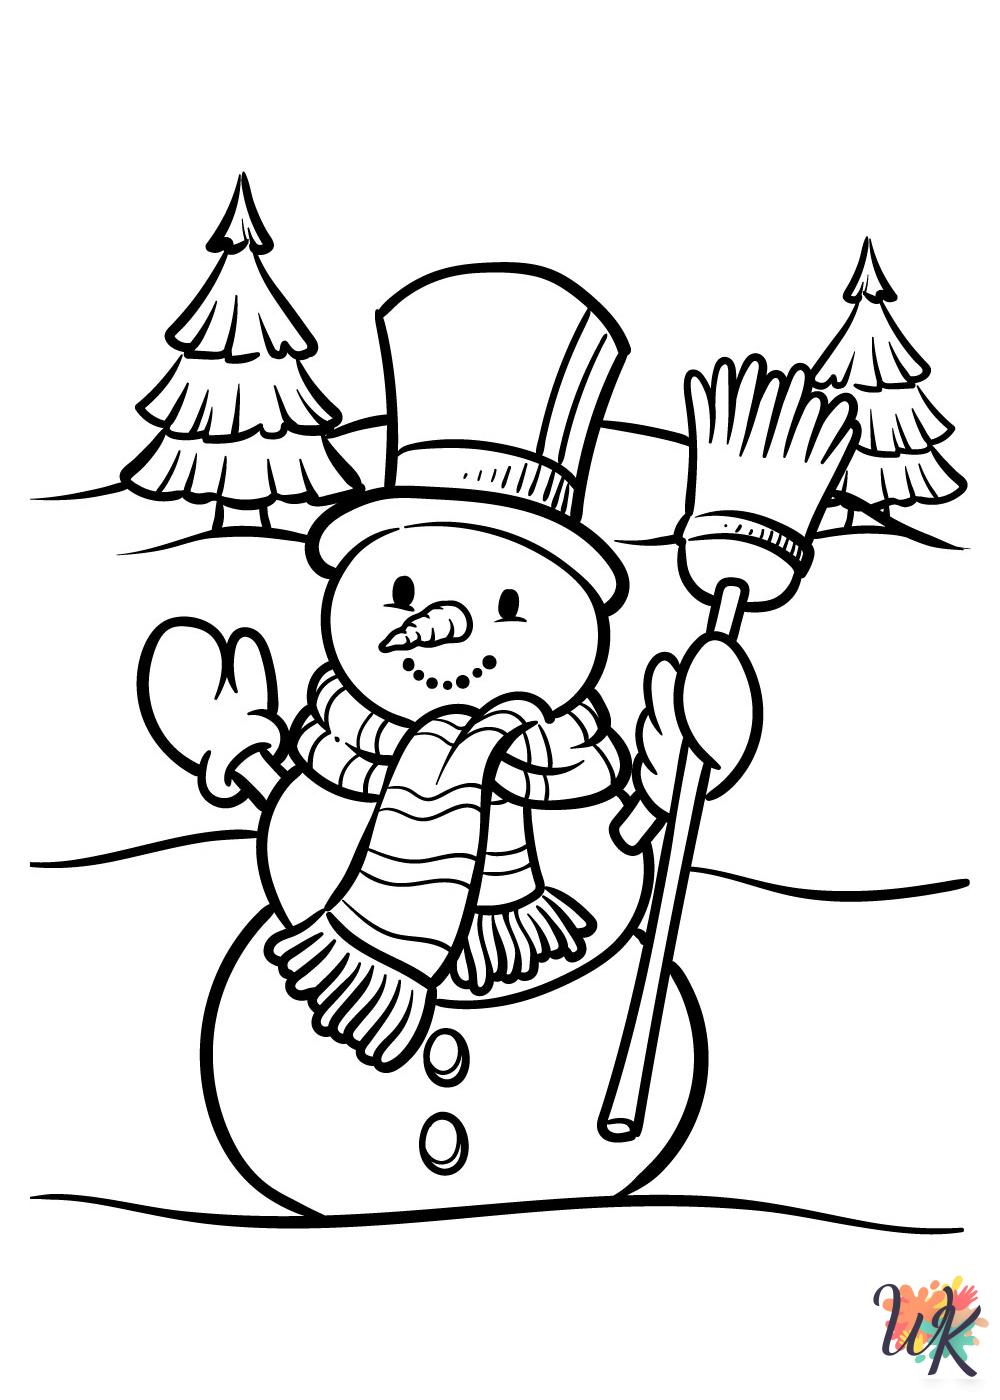 Snowman coloring pages for adults pdf